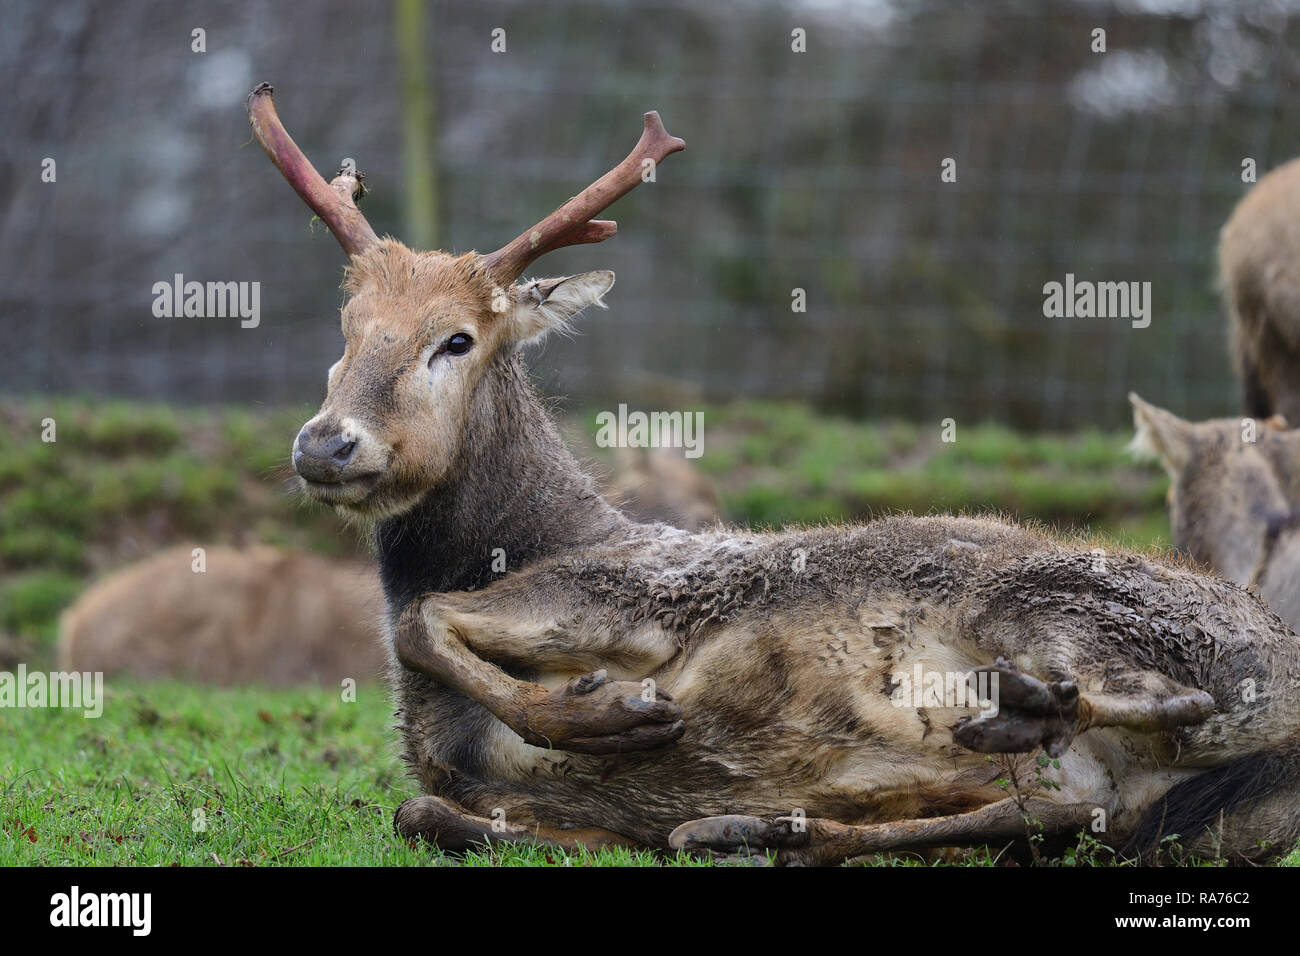 Low angle view of a Pere David's deer (elaphurus davidianus) lying on the ground Stock Photo